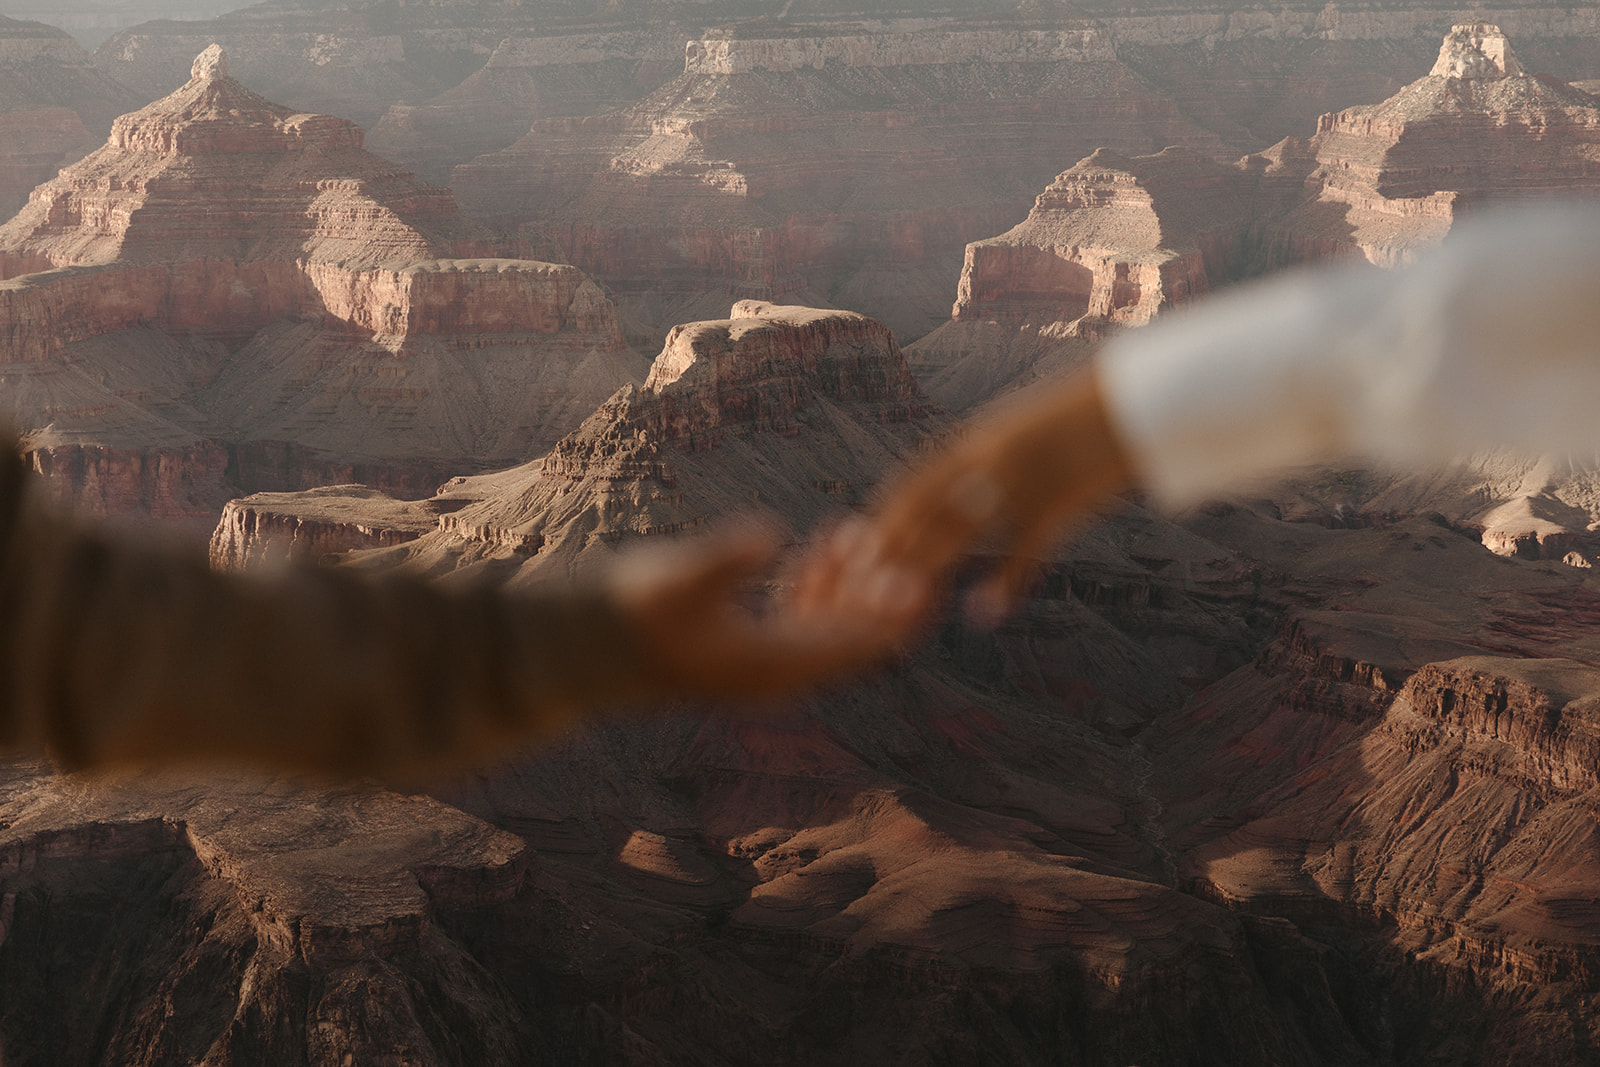 blurred hands reaching with Grand Canyon in focus